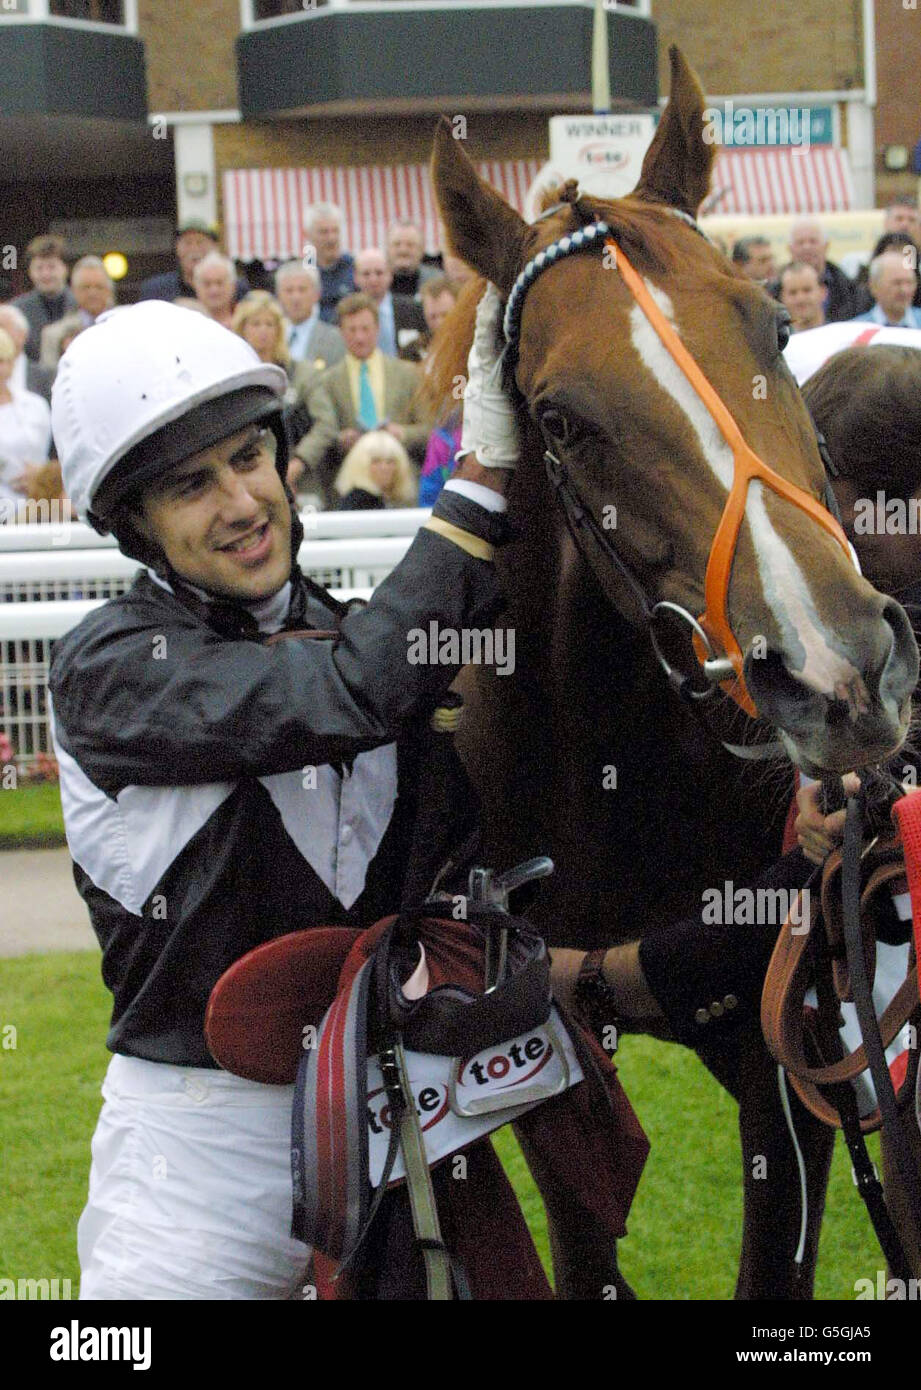 Ayr racing Continent. Winning jockey Darryl Holland in the winner's enclosure with Continent after winning the Ayr Gold Cup at Ayr. Stock Photo